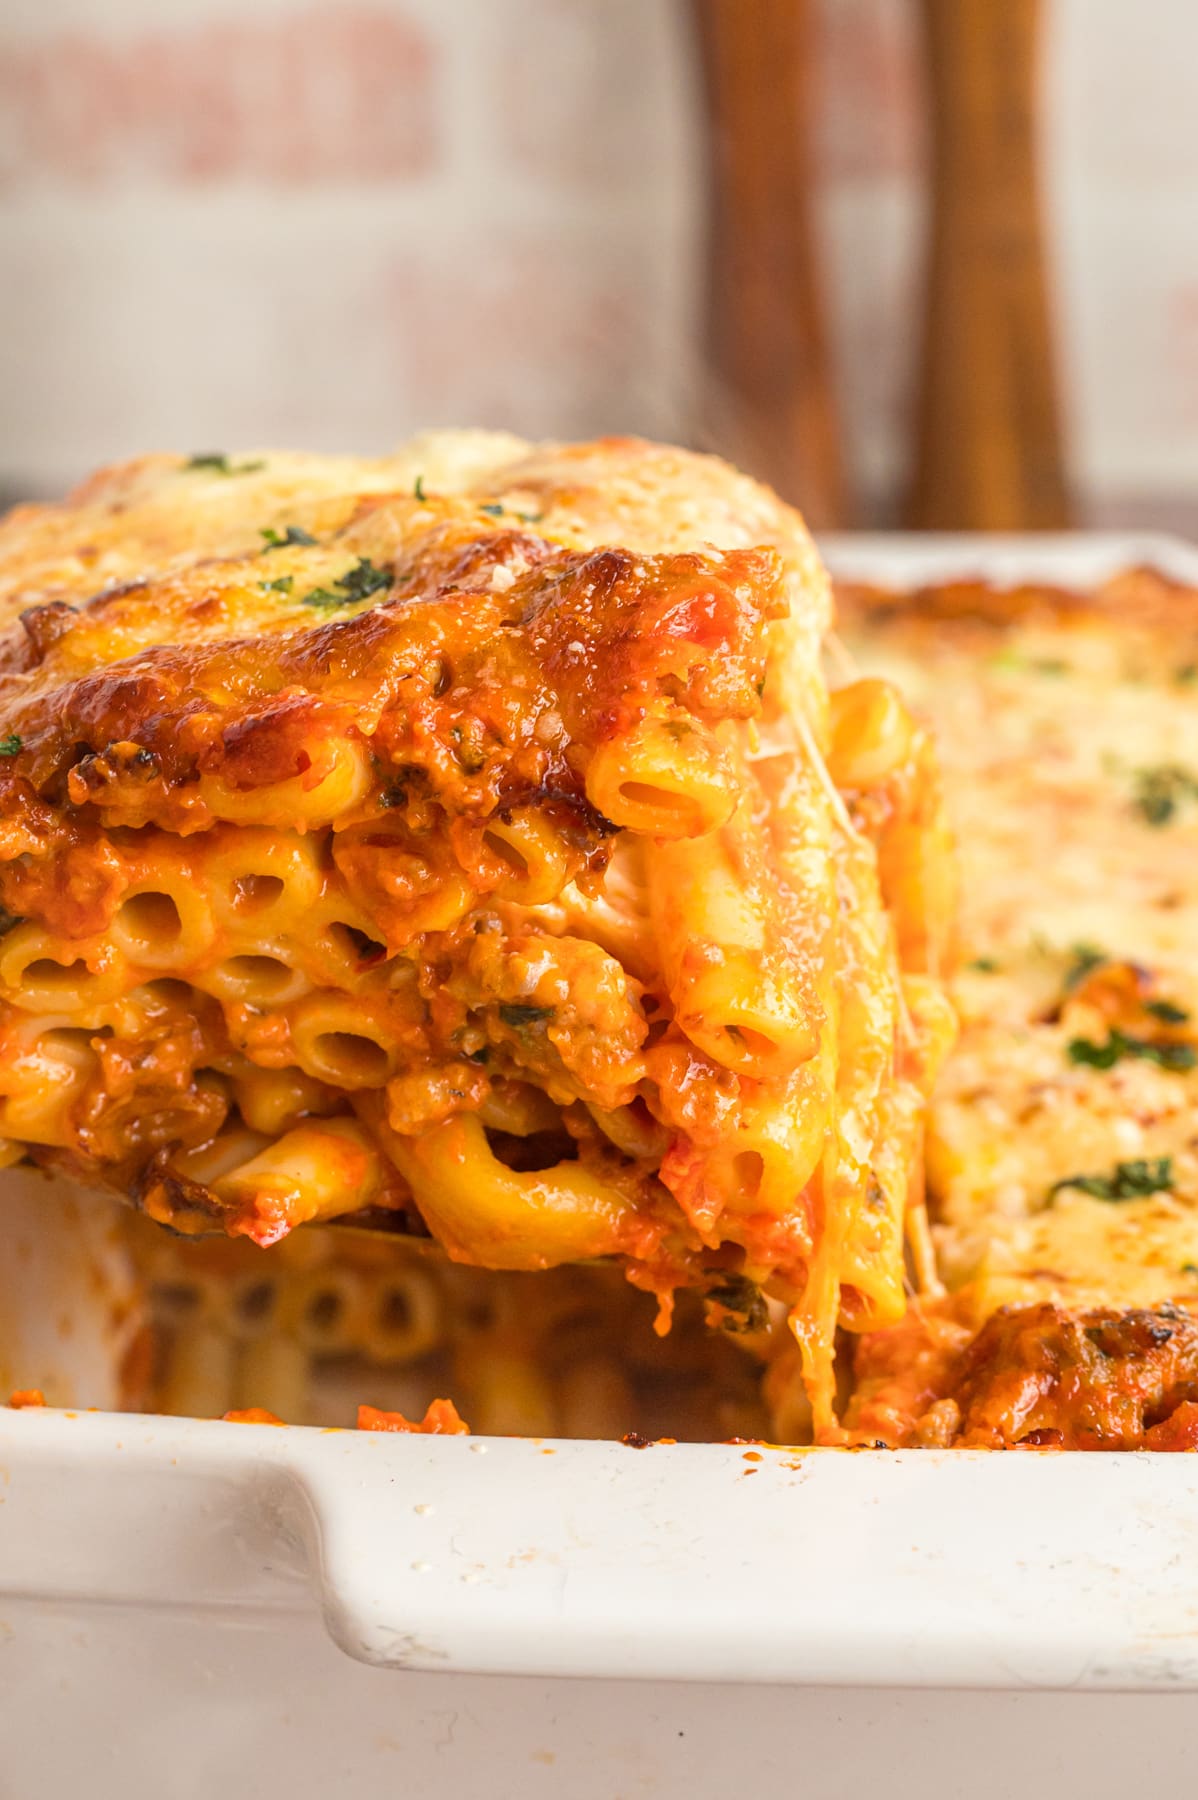 A portion of baked ziti being served from the pan